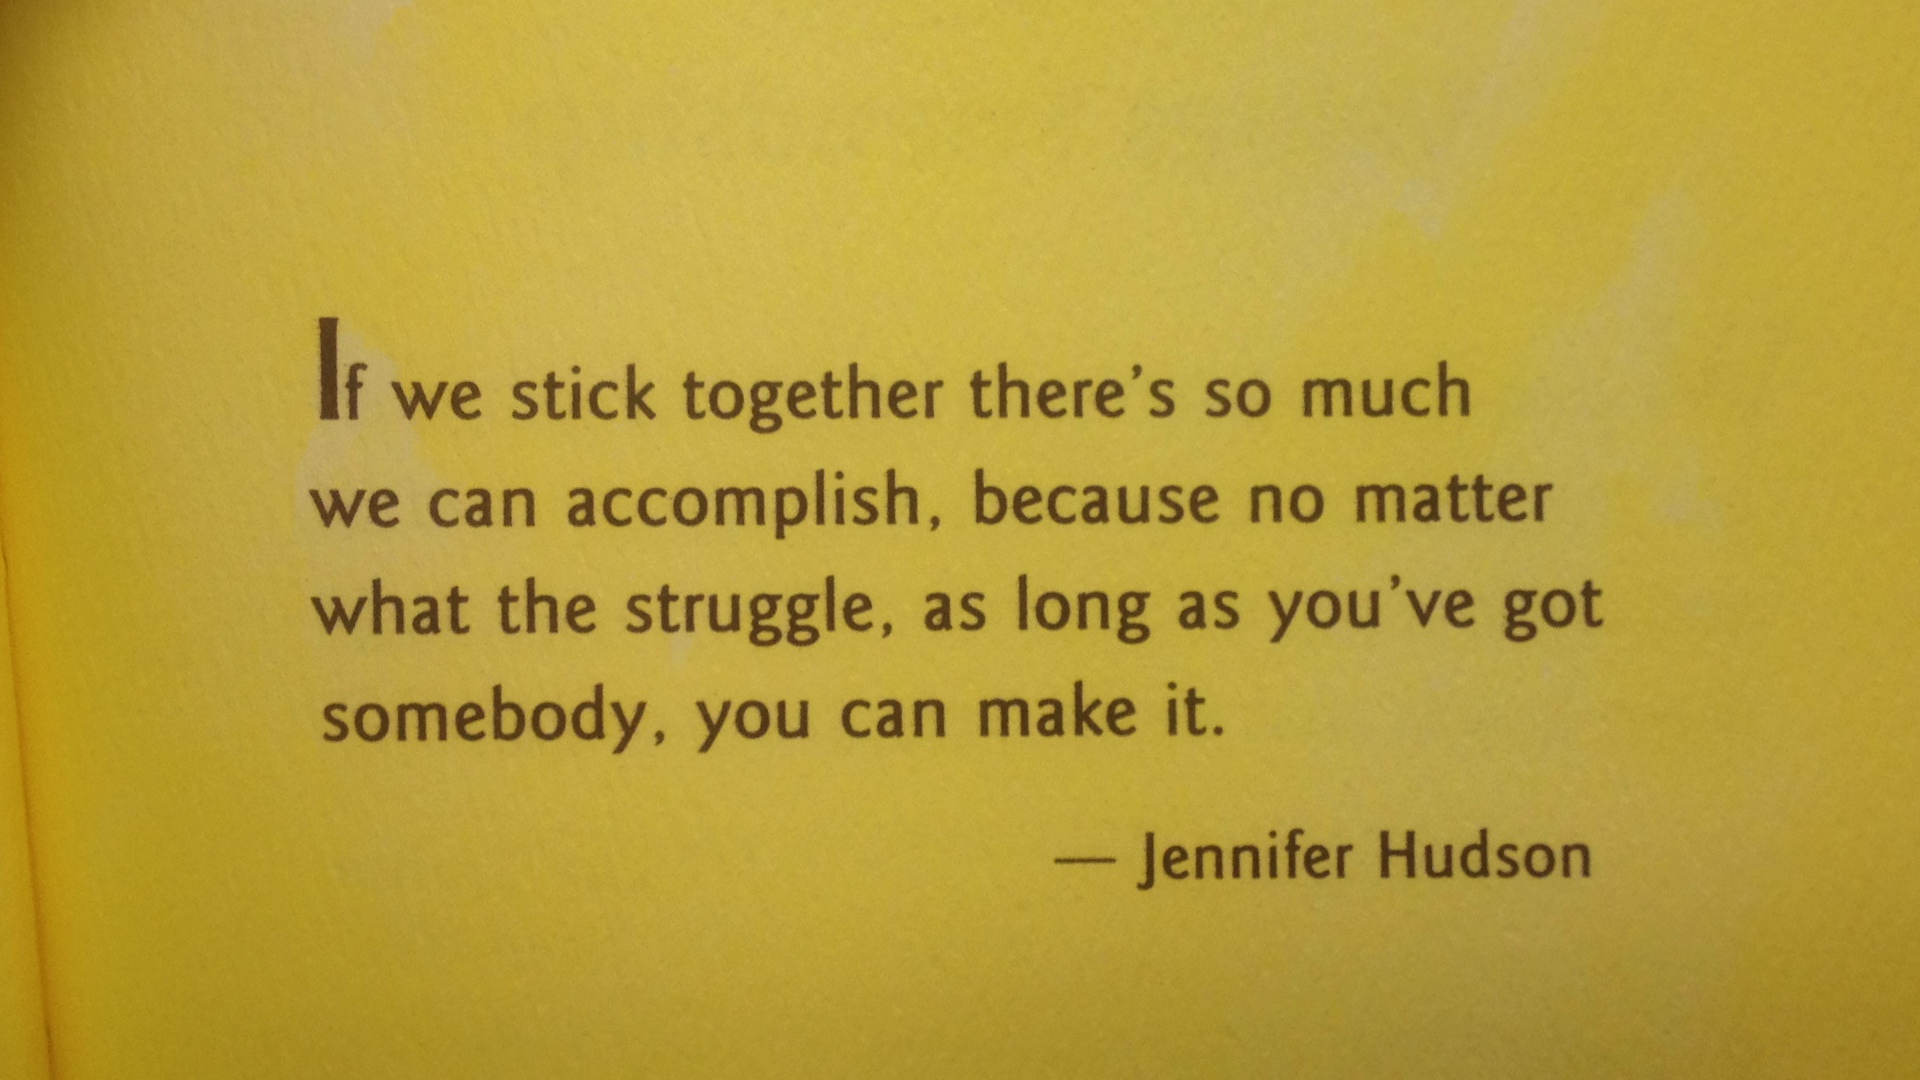 We Stick Together Quotes. QuotesGram